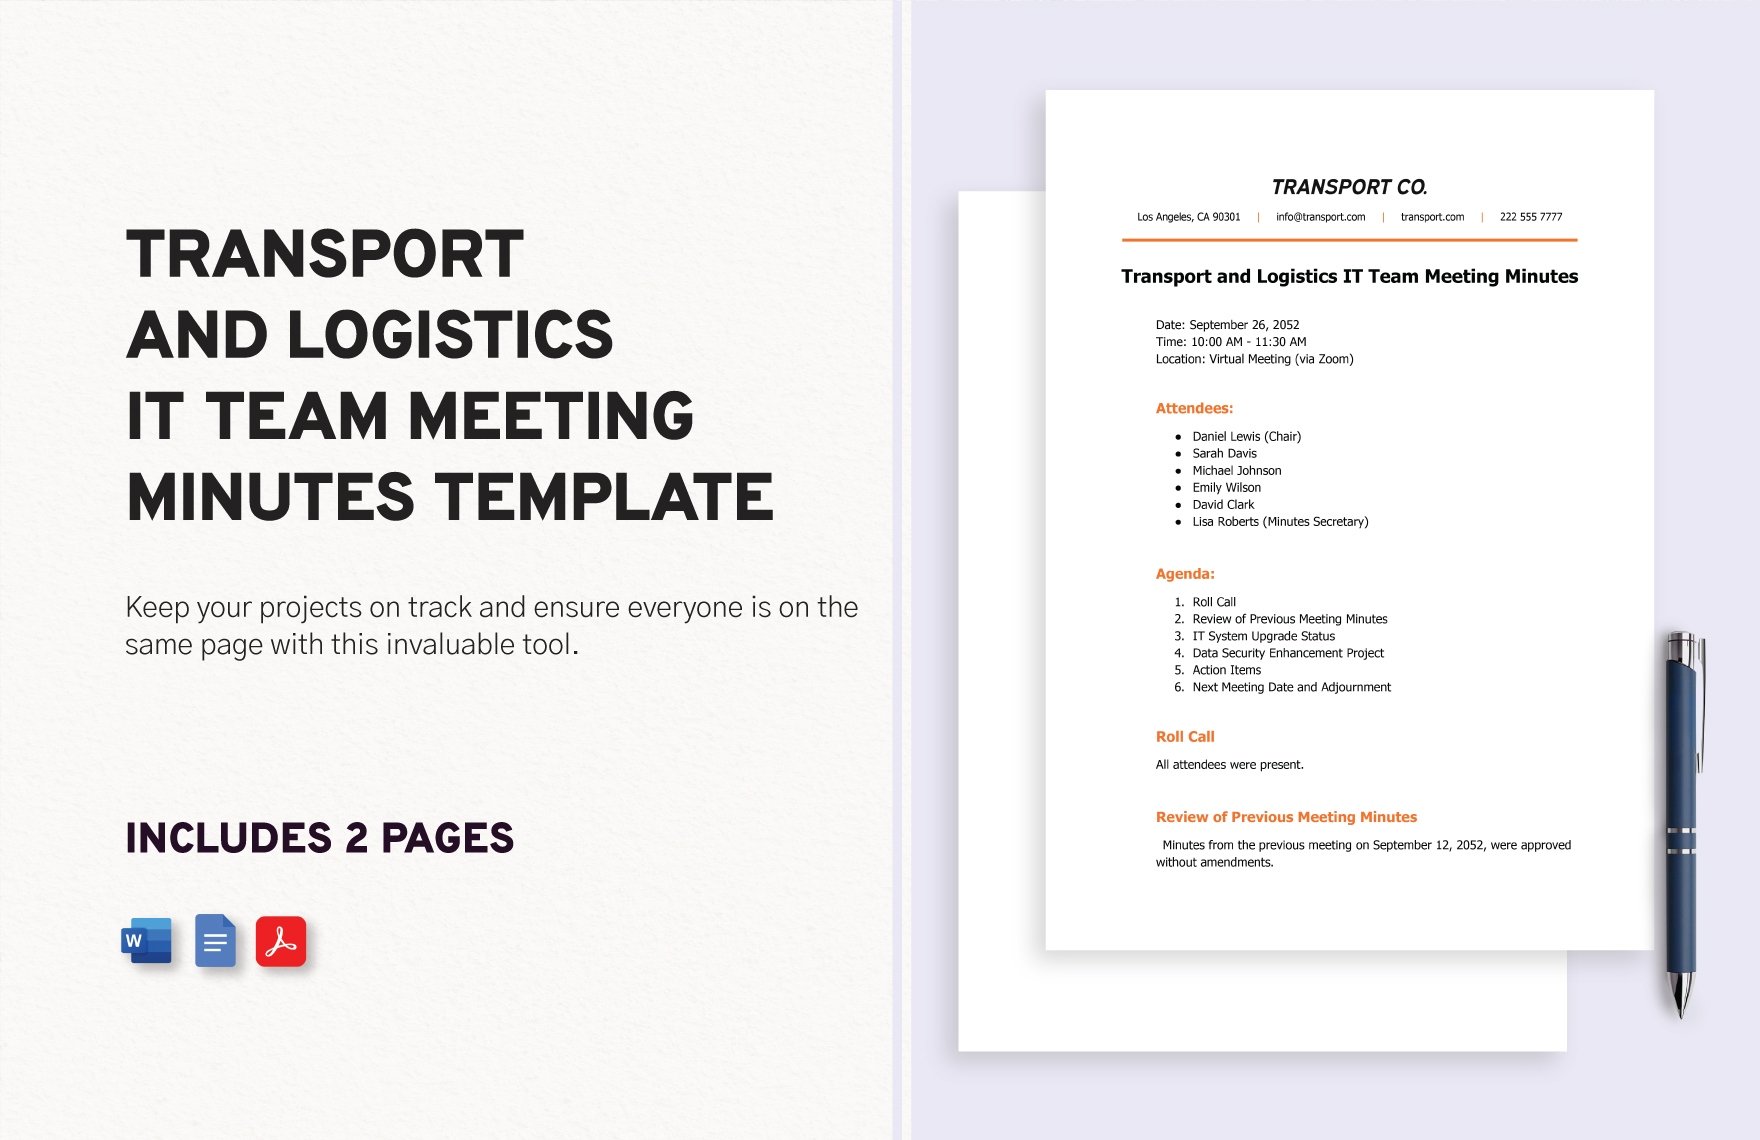 Transport and Logistics IT Team Meeting Minutes Template